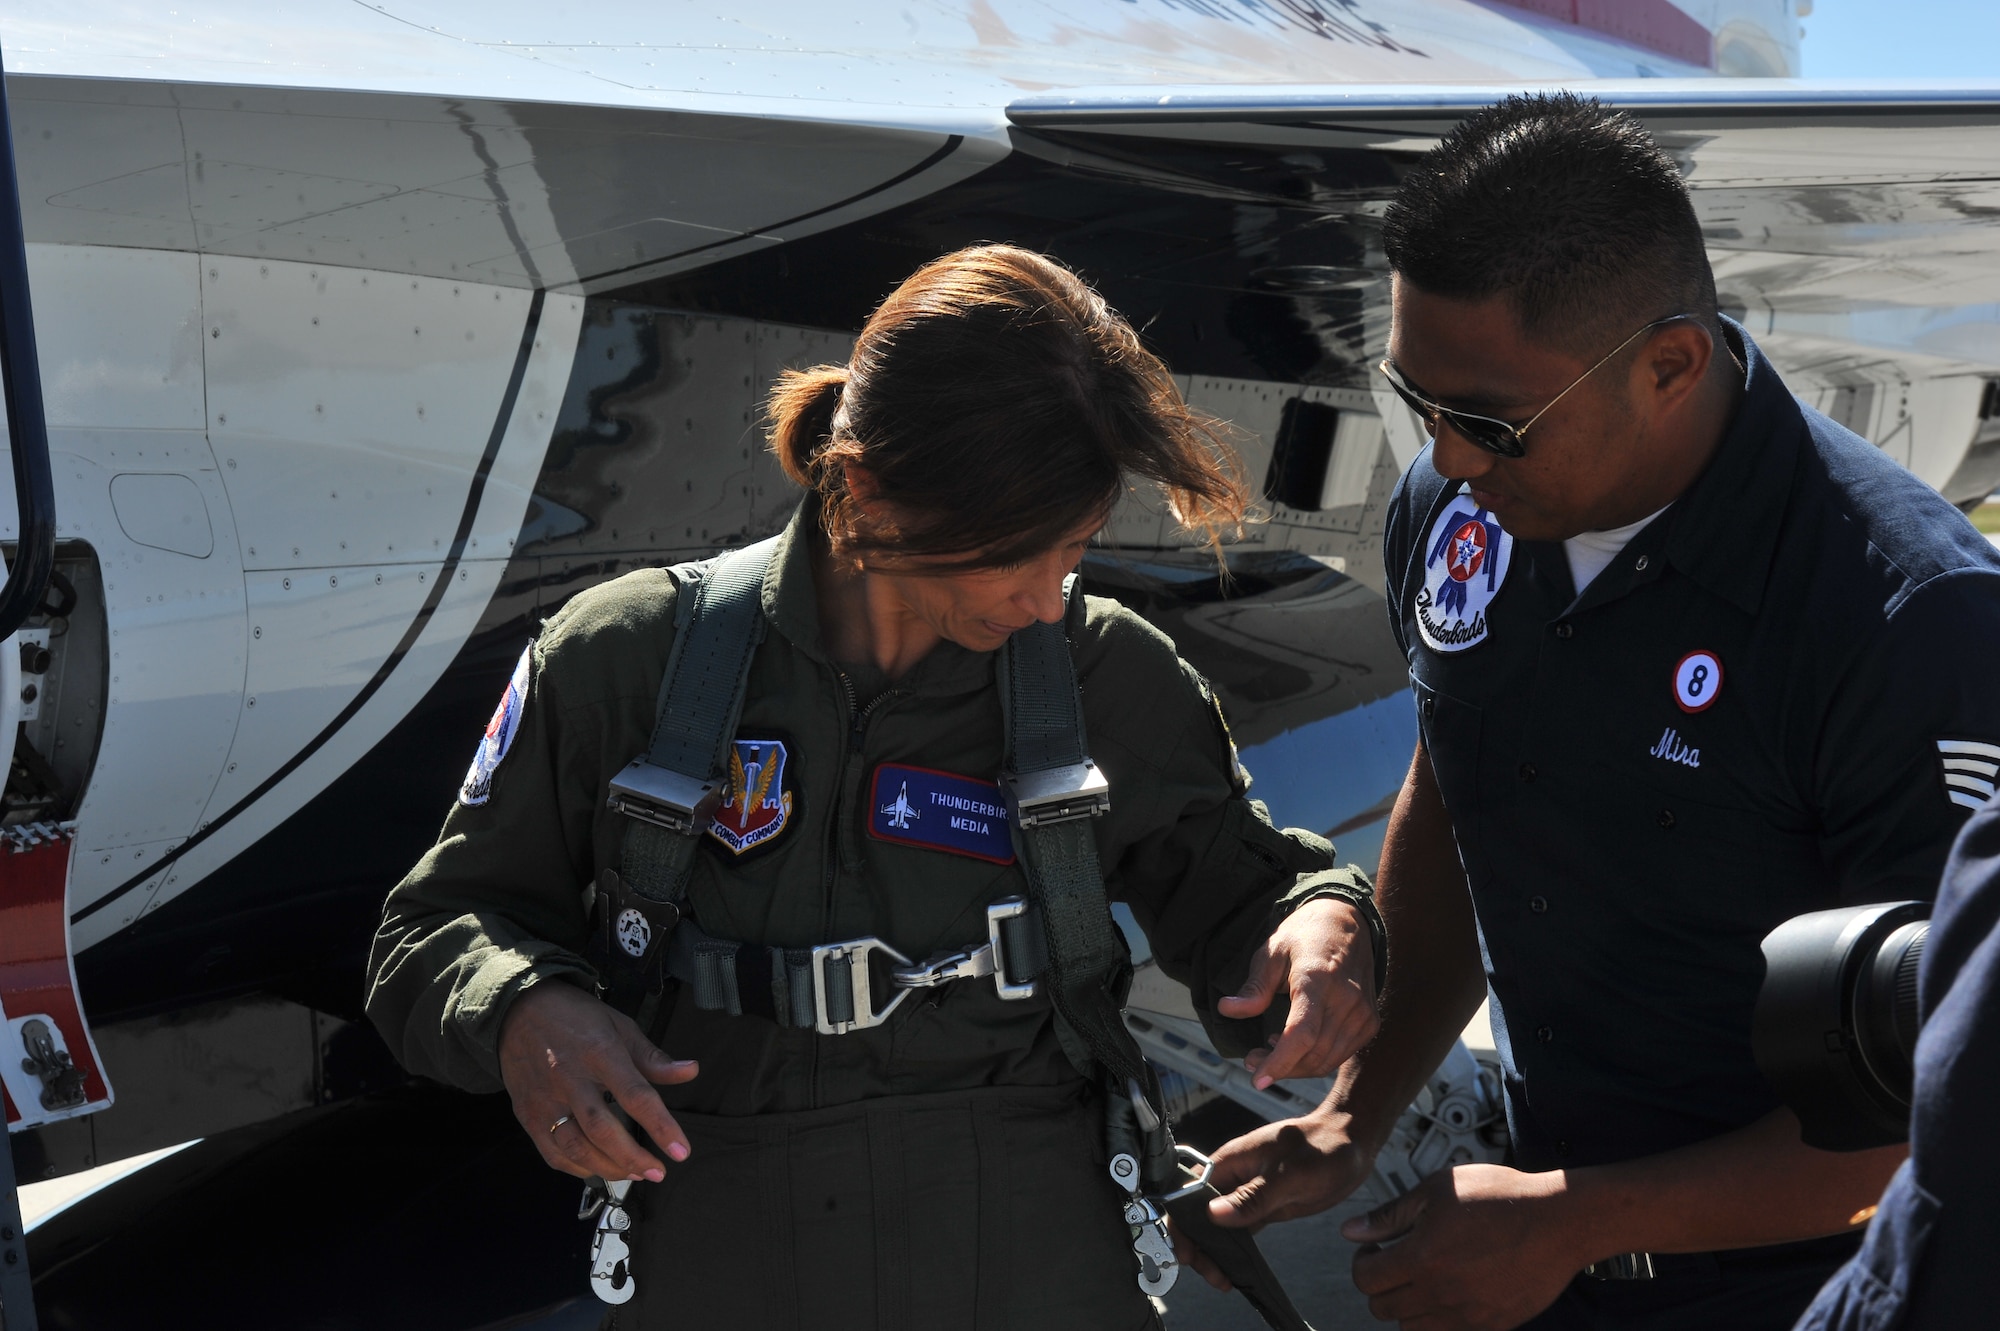 Staff. Sgt. Mark Mira, U.S. Air Force Thunderbirds crew chief, assists Robyn Nance, KXLY news anchor, for her flight in the F-16 Fighting Falcon before SkyFest 2014 at Fairchild Air Force Base, Wash., May 30, 2014.  The Thunderbirds is an Air Combat Command unit composed of eight pilots, including six demonstration pilots, four support officers, three civilians and more than 130 enlisted personnel performing in 25 career fields. (U.S. Air Force photo by Staff Sgt. Veronica Montes)